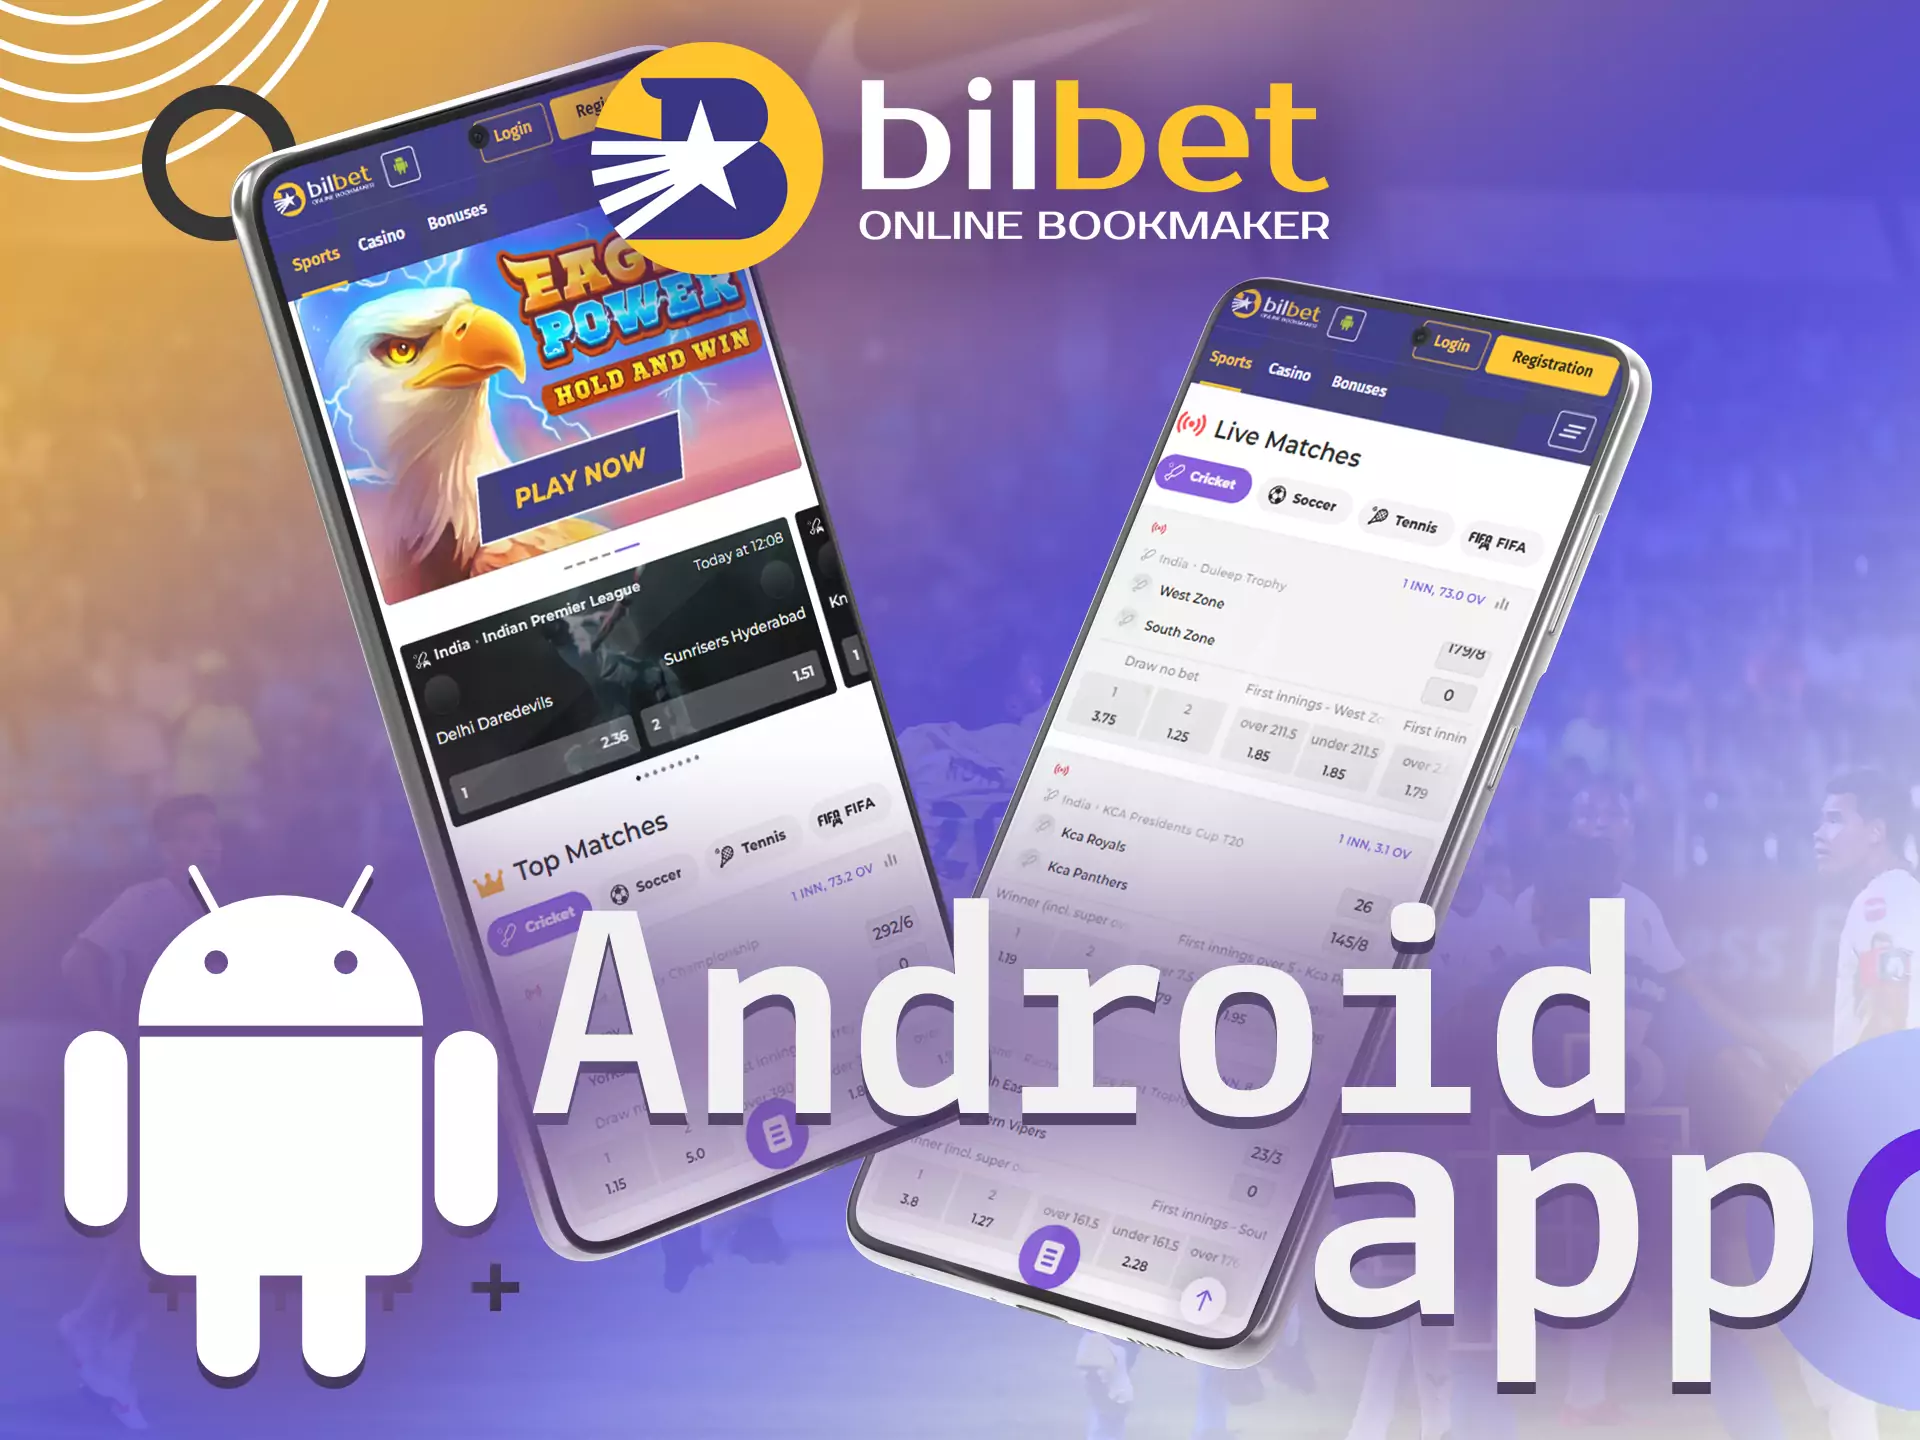 To bet on Bilbet from a smartphone, you should install the app for Android.